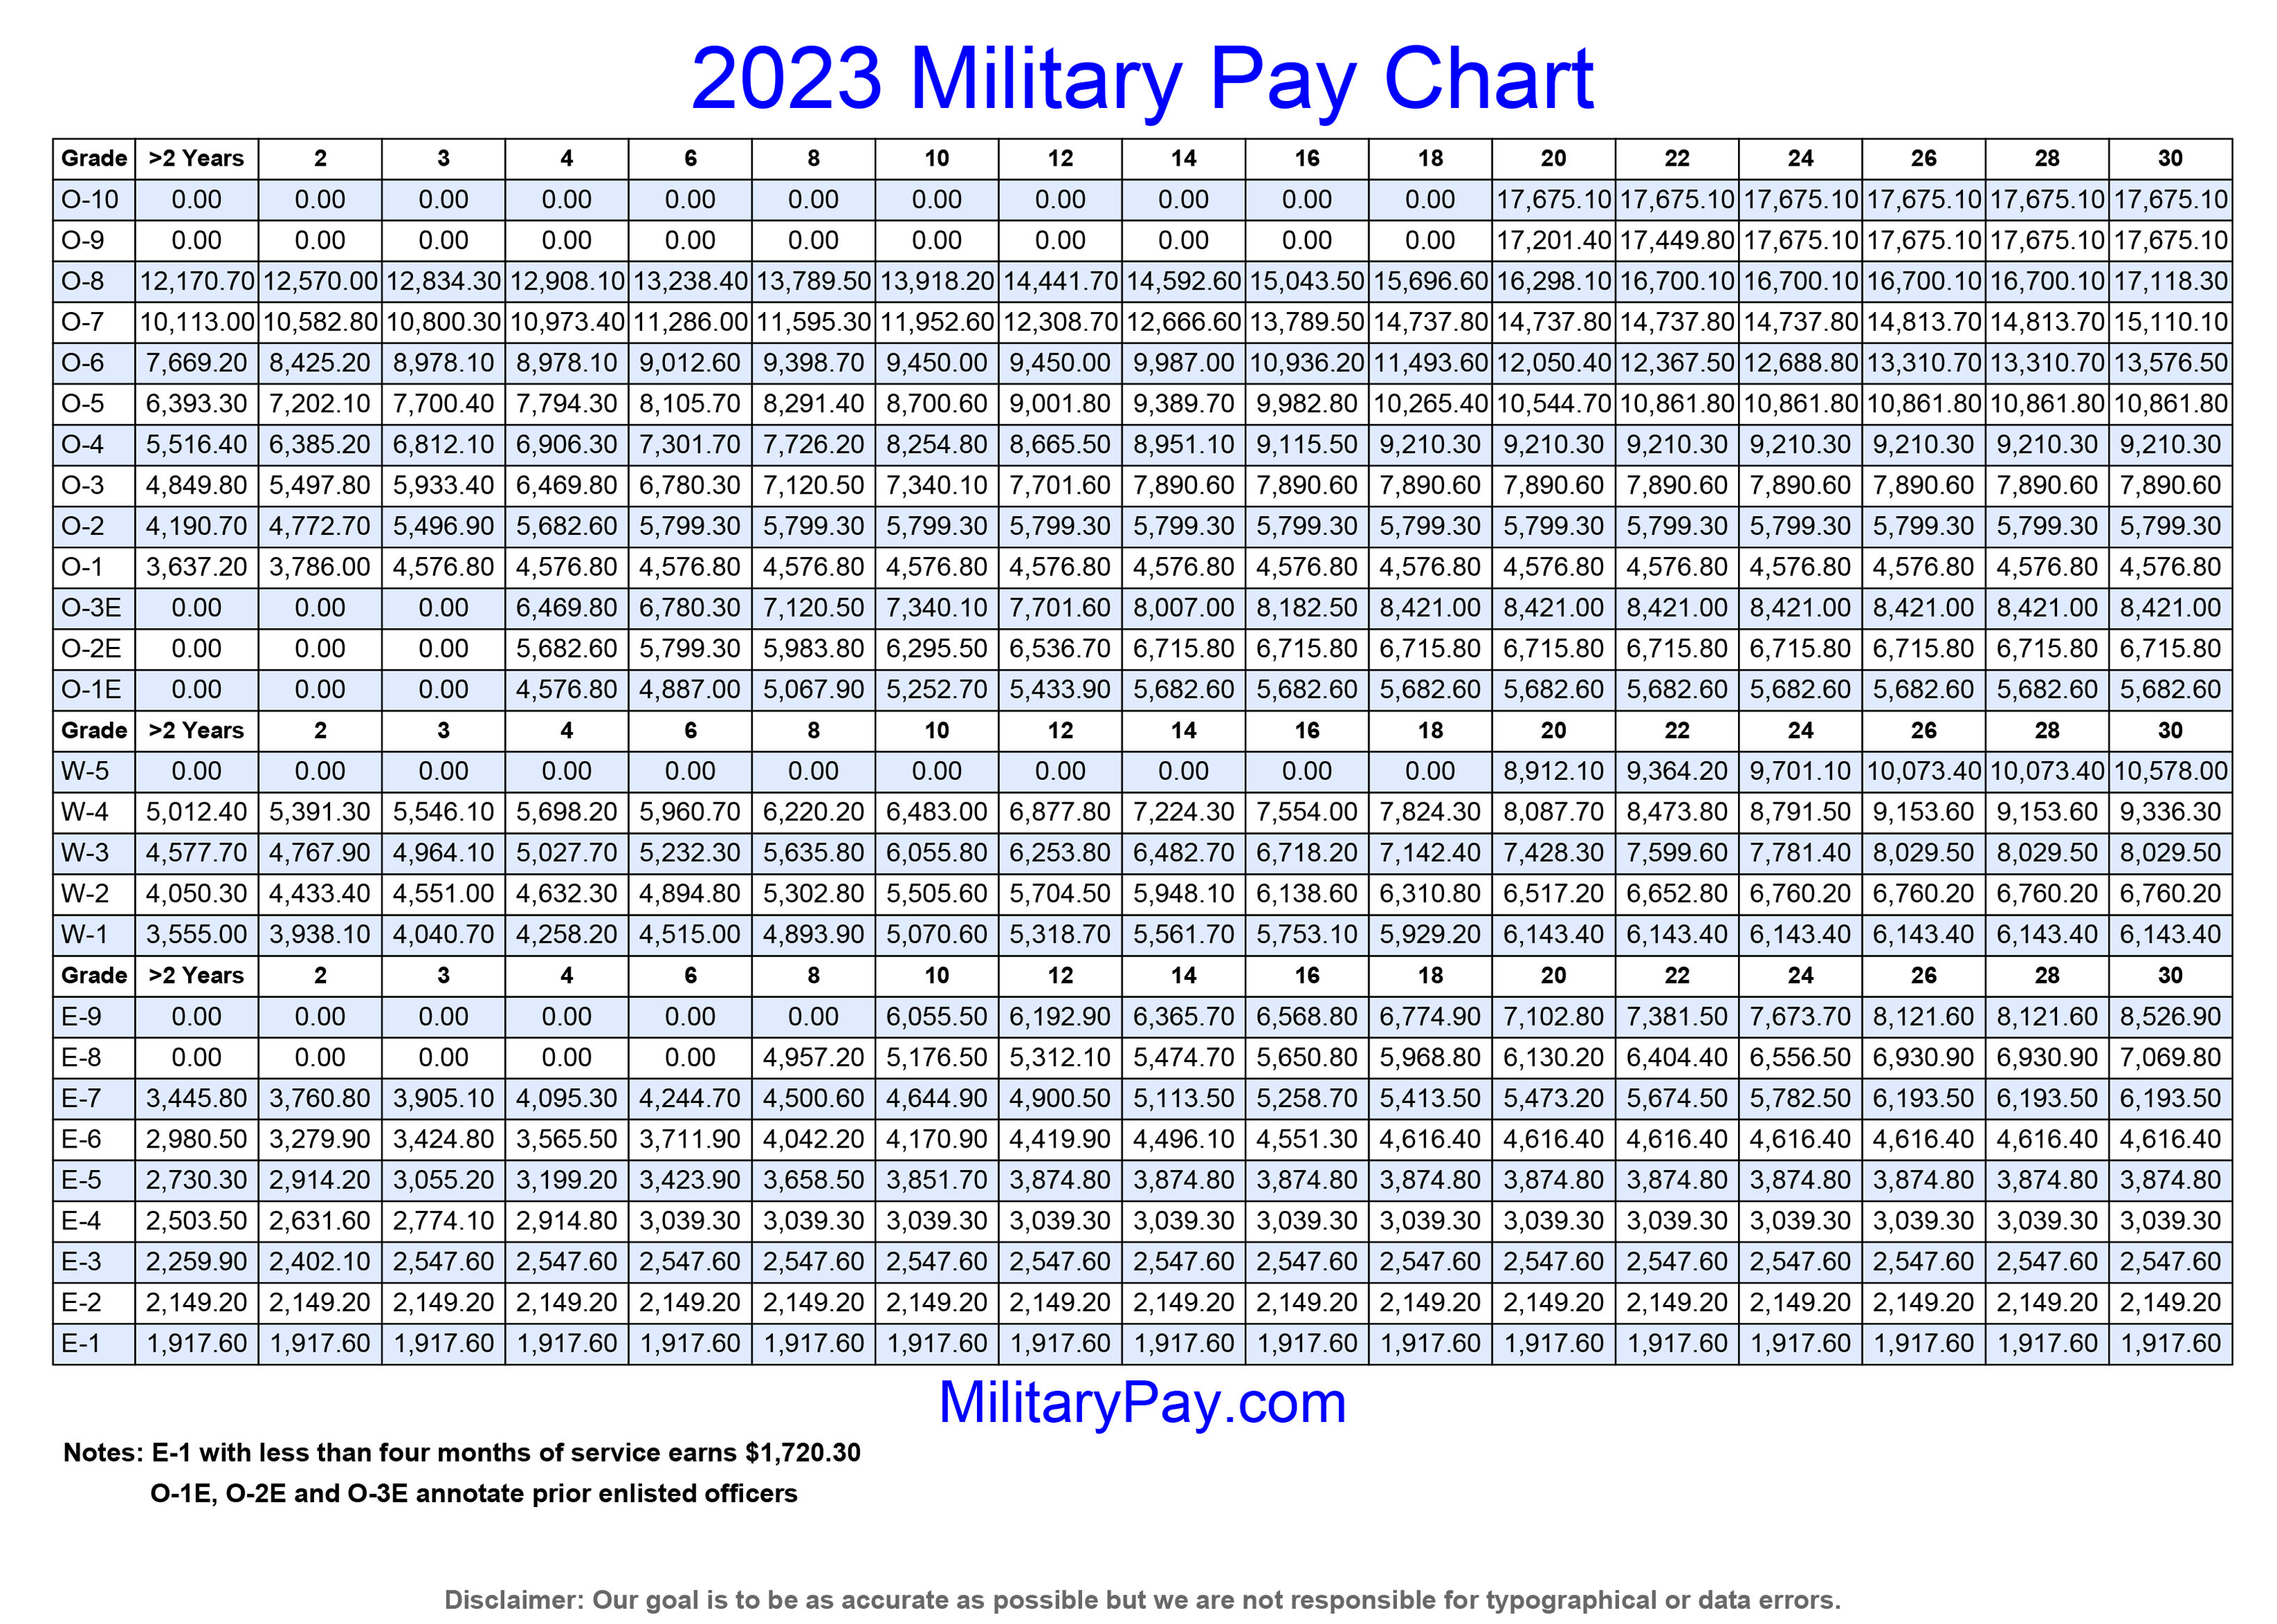 military-pay-charts-1949-to-2023-plus-estimated-to-2050